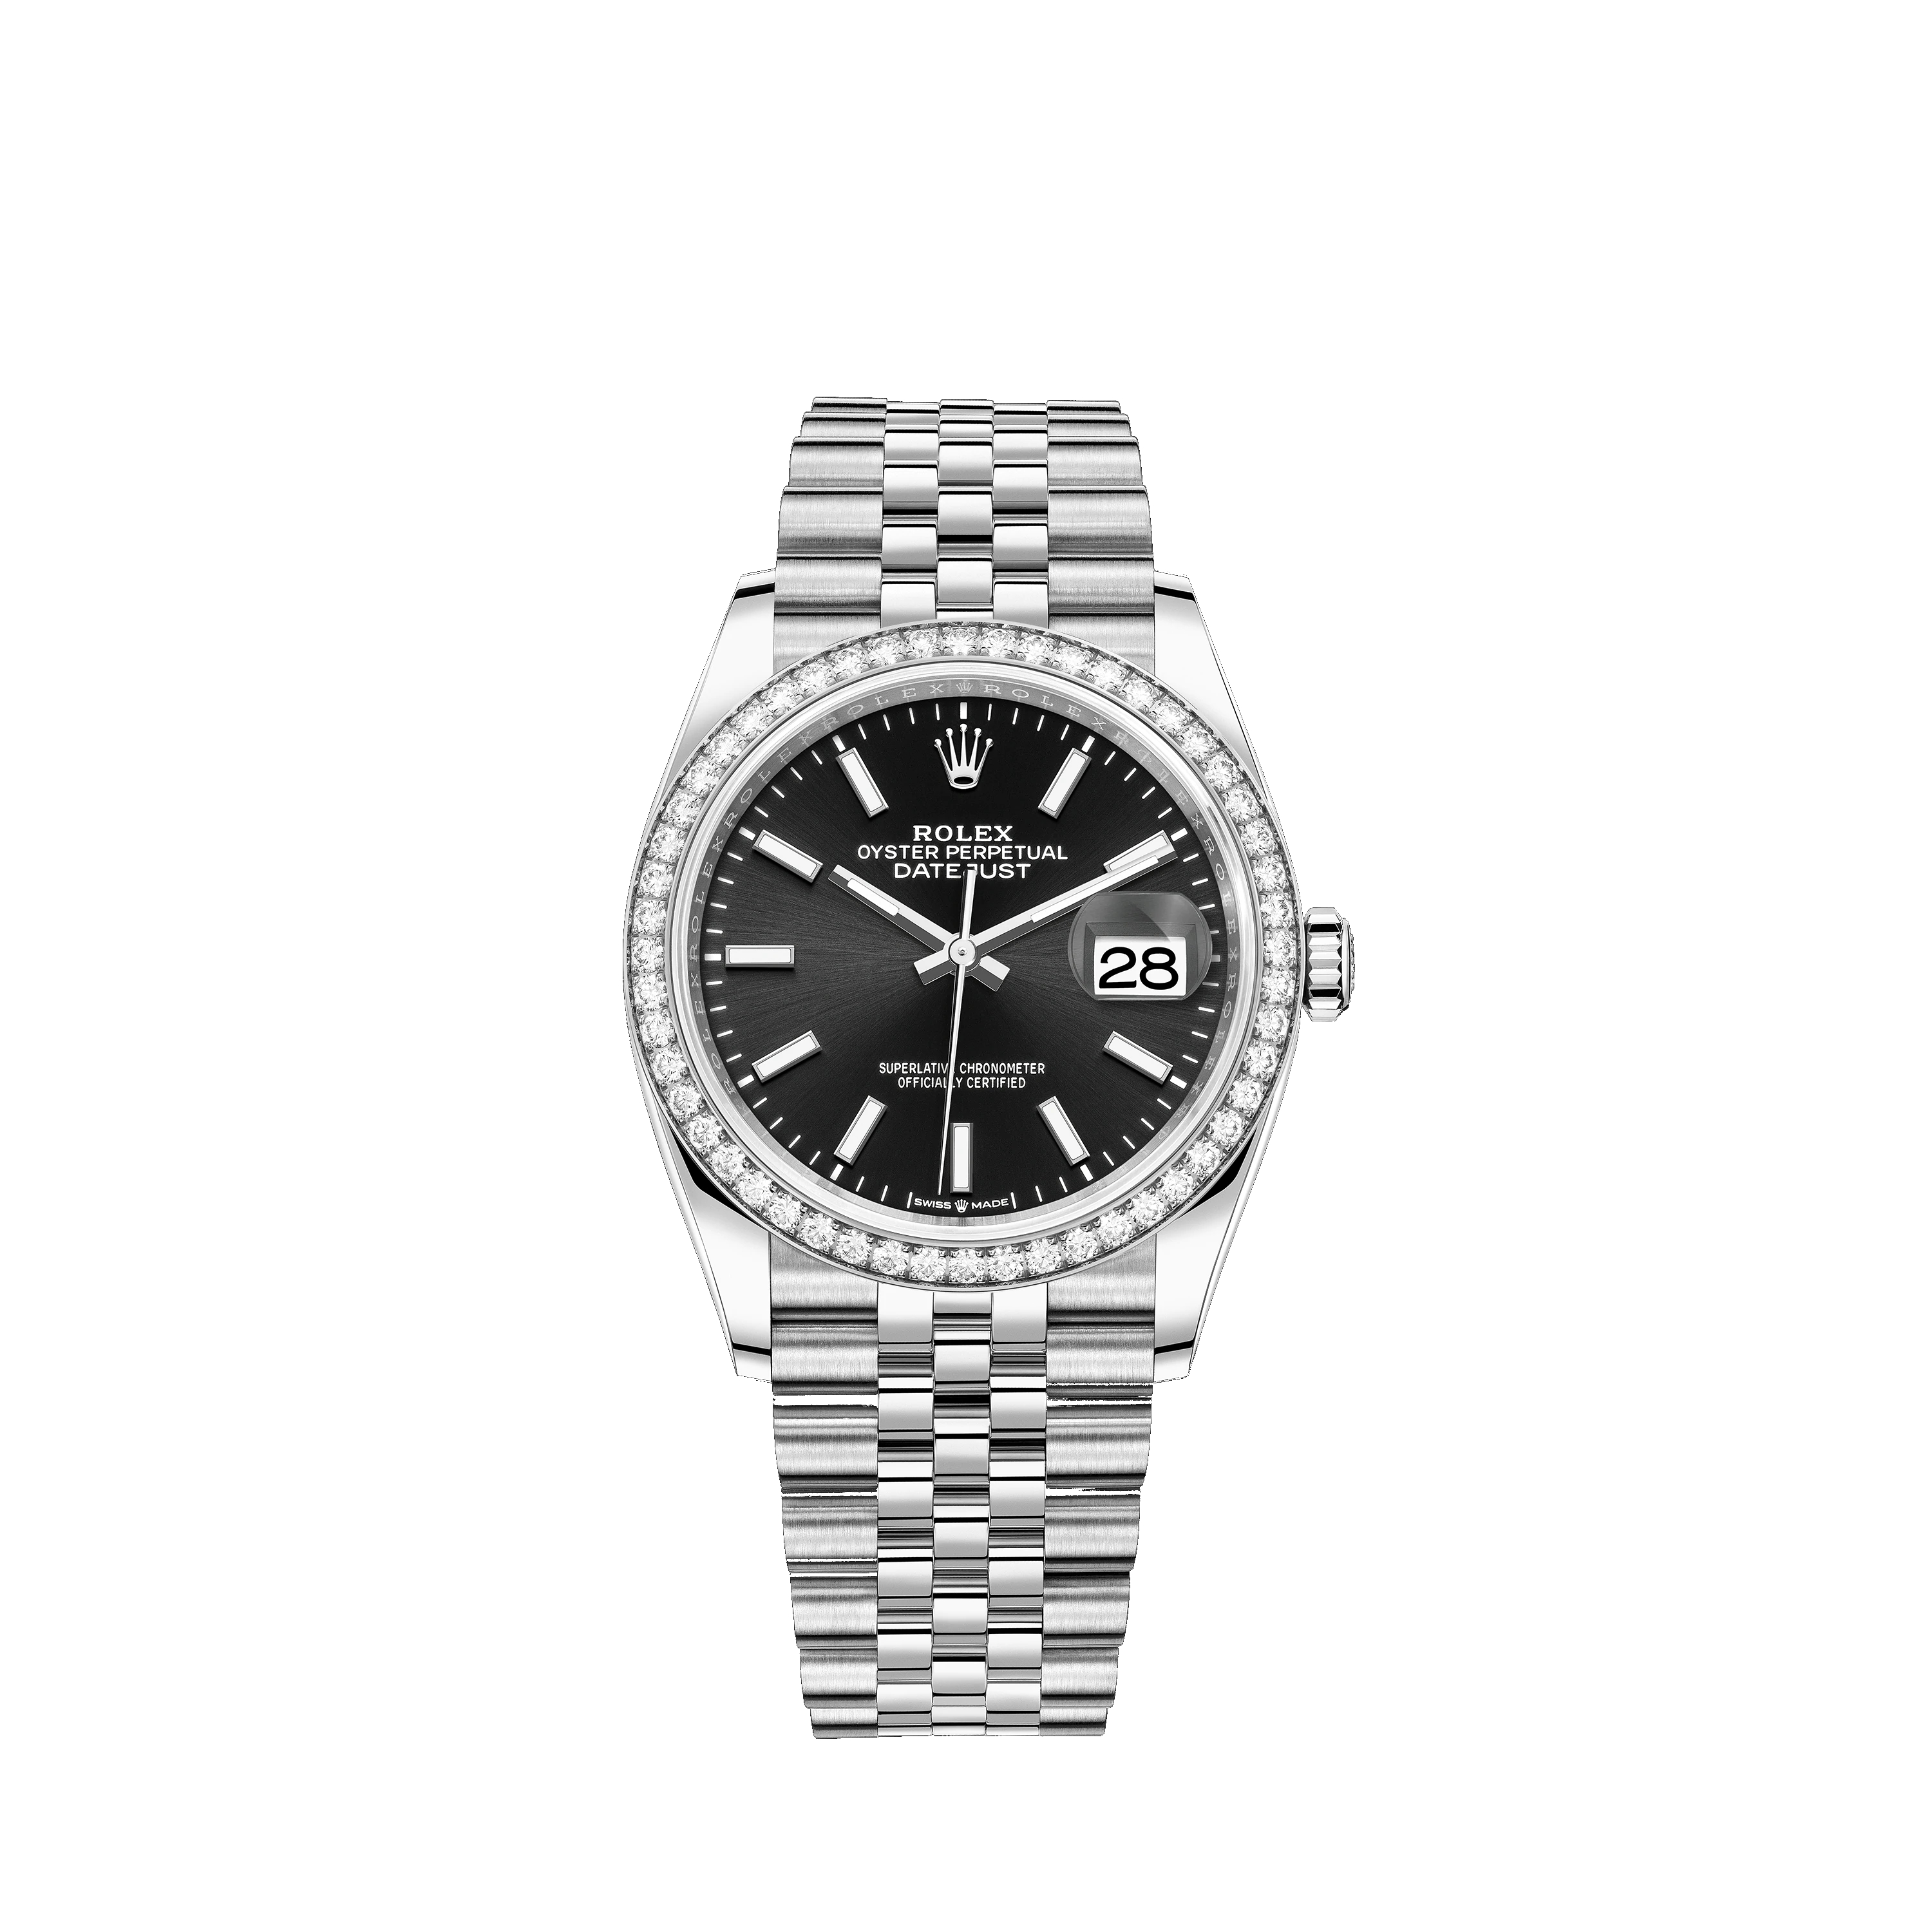 Datejust 36 126284RBR White Gold, Stainless Steel & Diamonds Watch (Black)